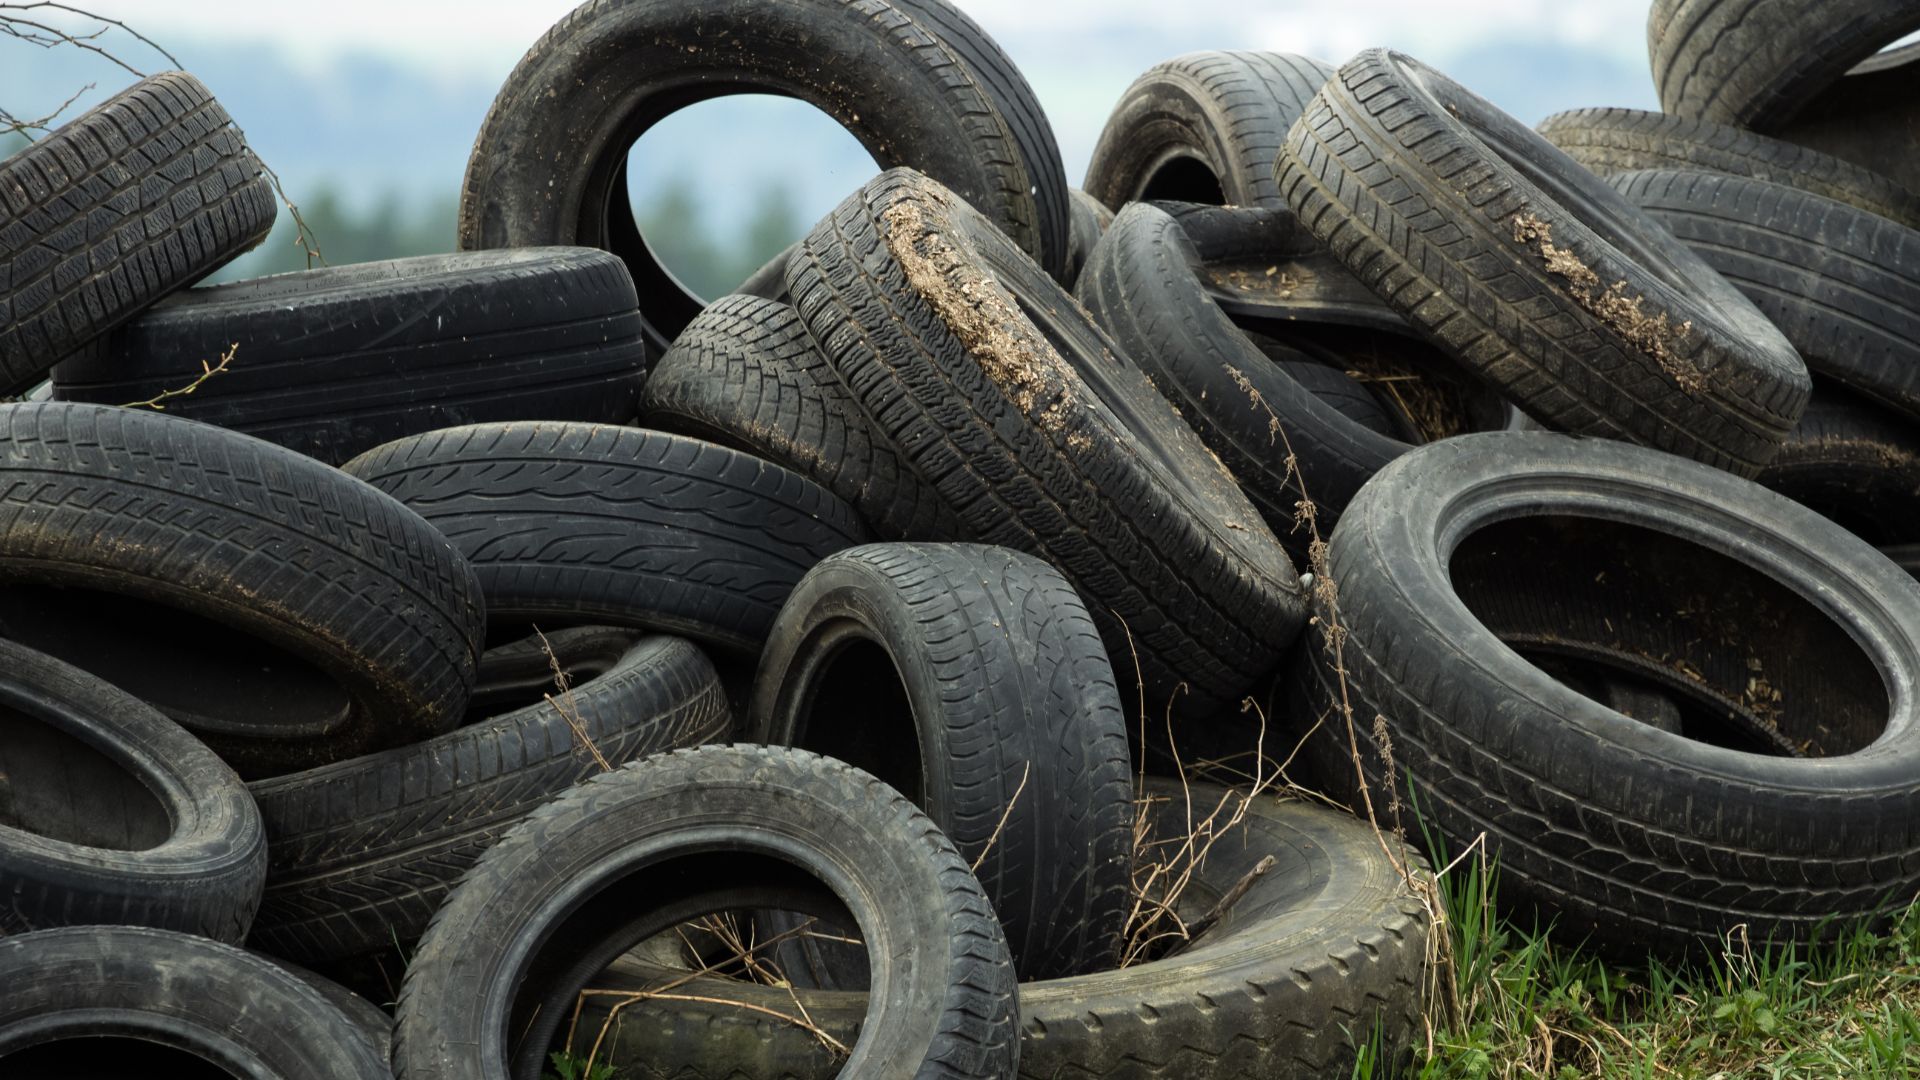 a pile of old tires sitting in the grass.